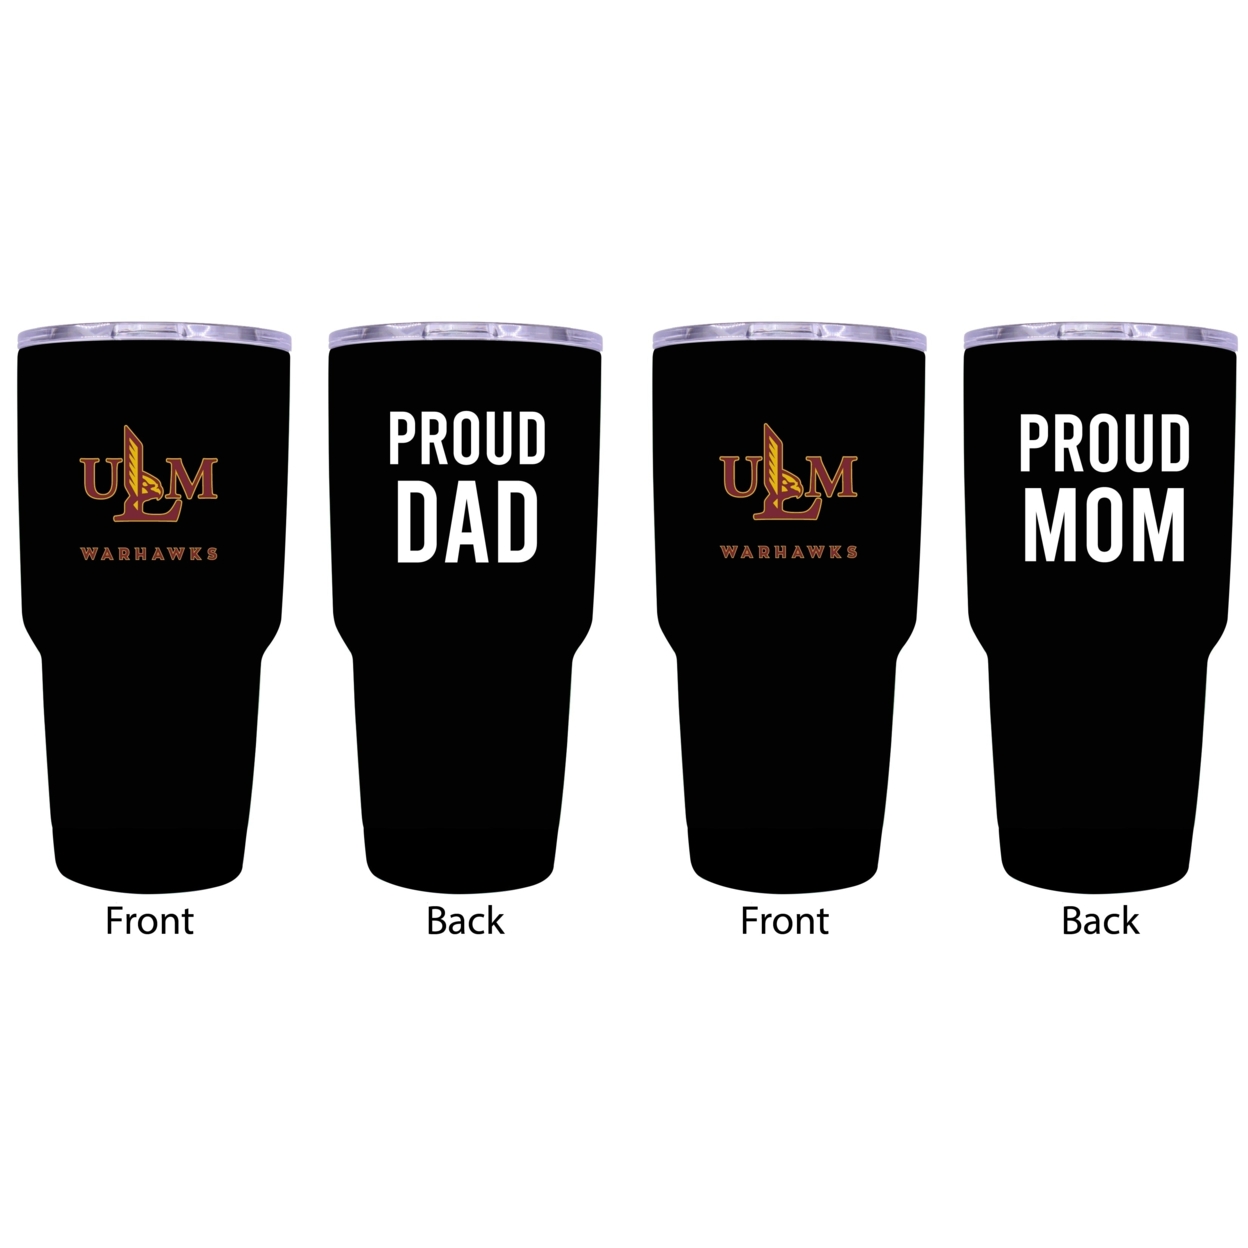 University Of Louisiana Monroe Proud Mom And Dad 24 Oz Insulated Stainless Steel Tumblers 2 Pack Black.